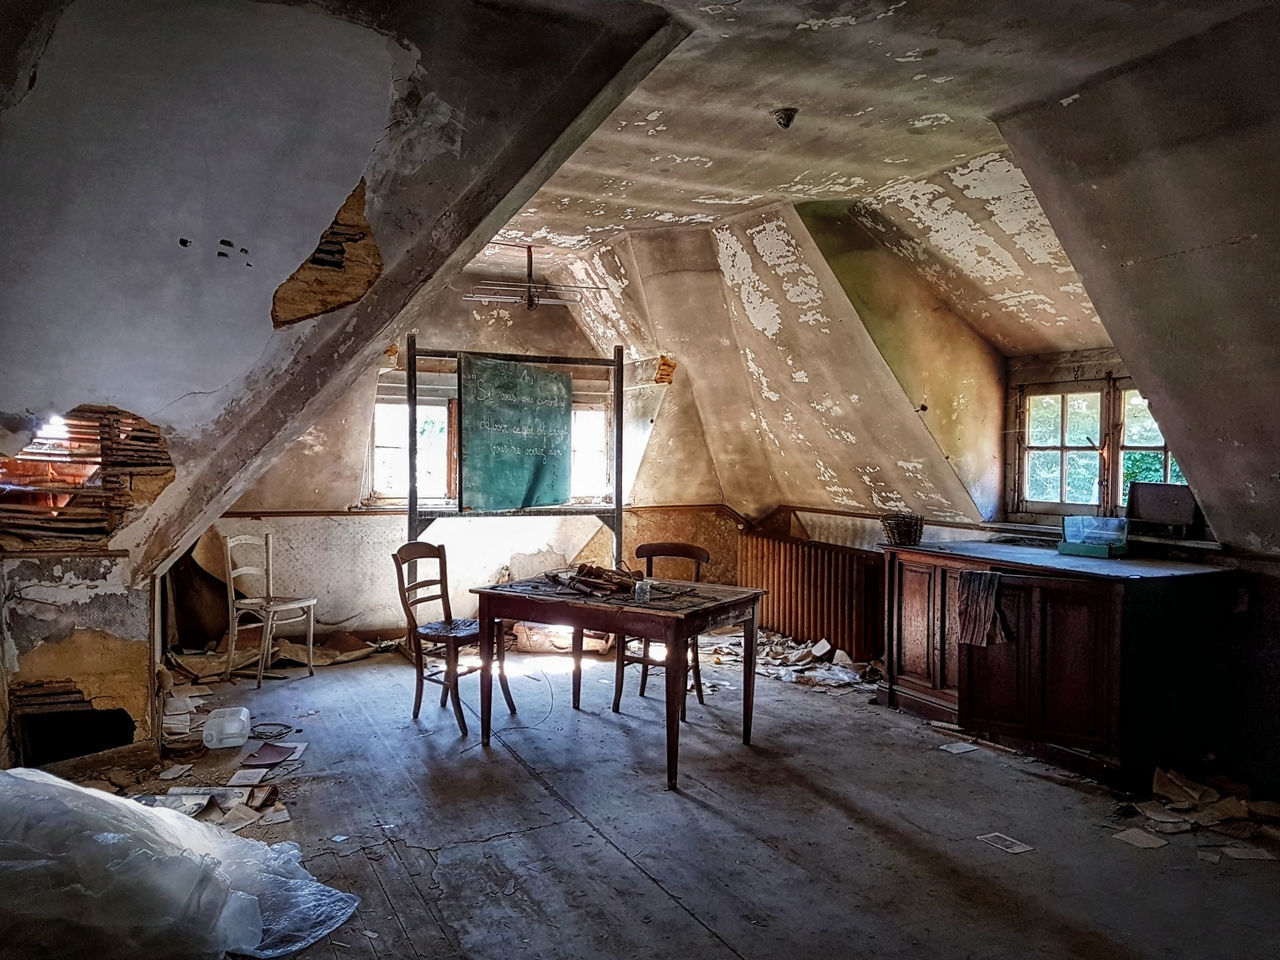 indoors, abandoned, window, architecture, run-down, seat, obsolete, damaged, deterioration, decline, bad condition, table, furniture, building, old, day, domestic room, empty, no people, chair, flooring, ceiling, messy, ruined